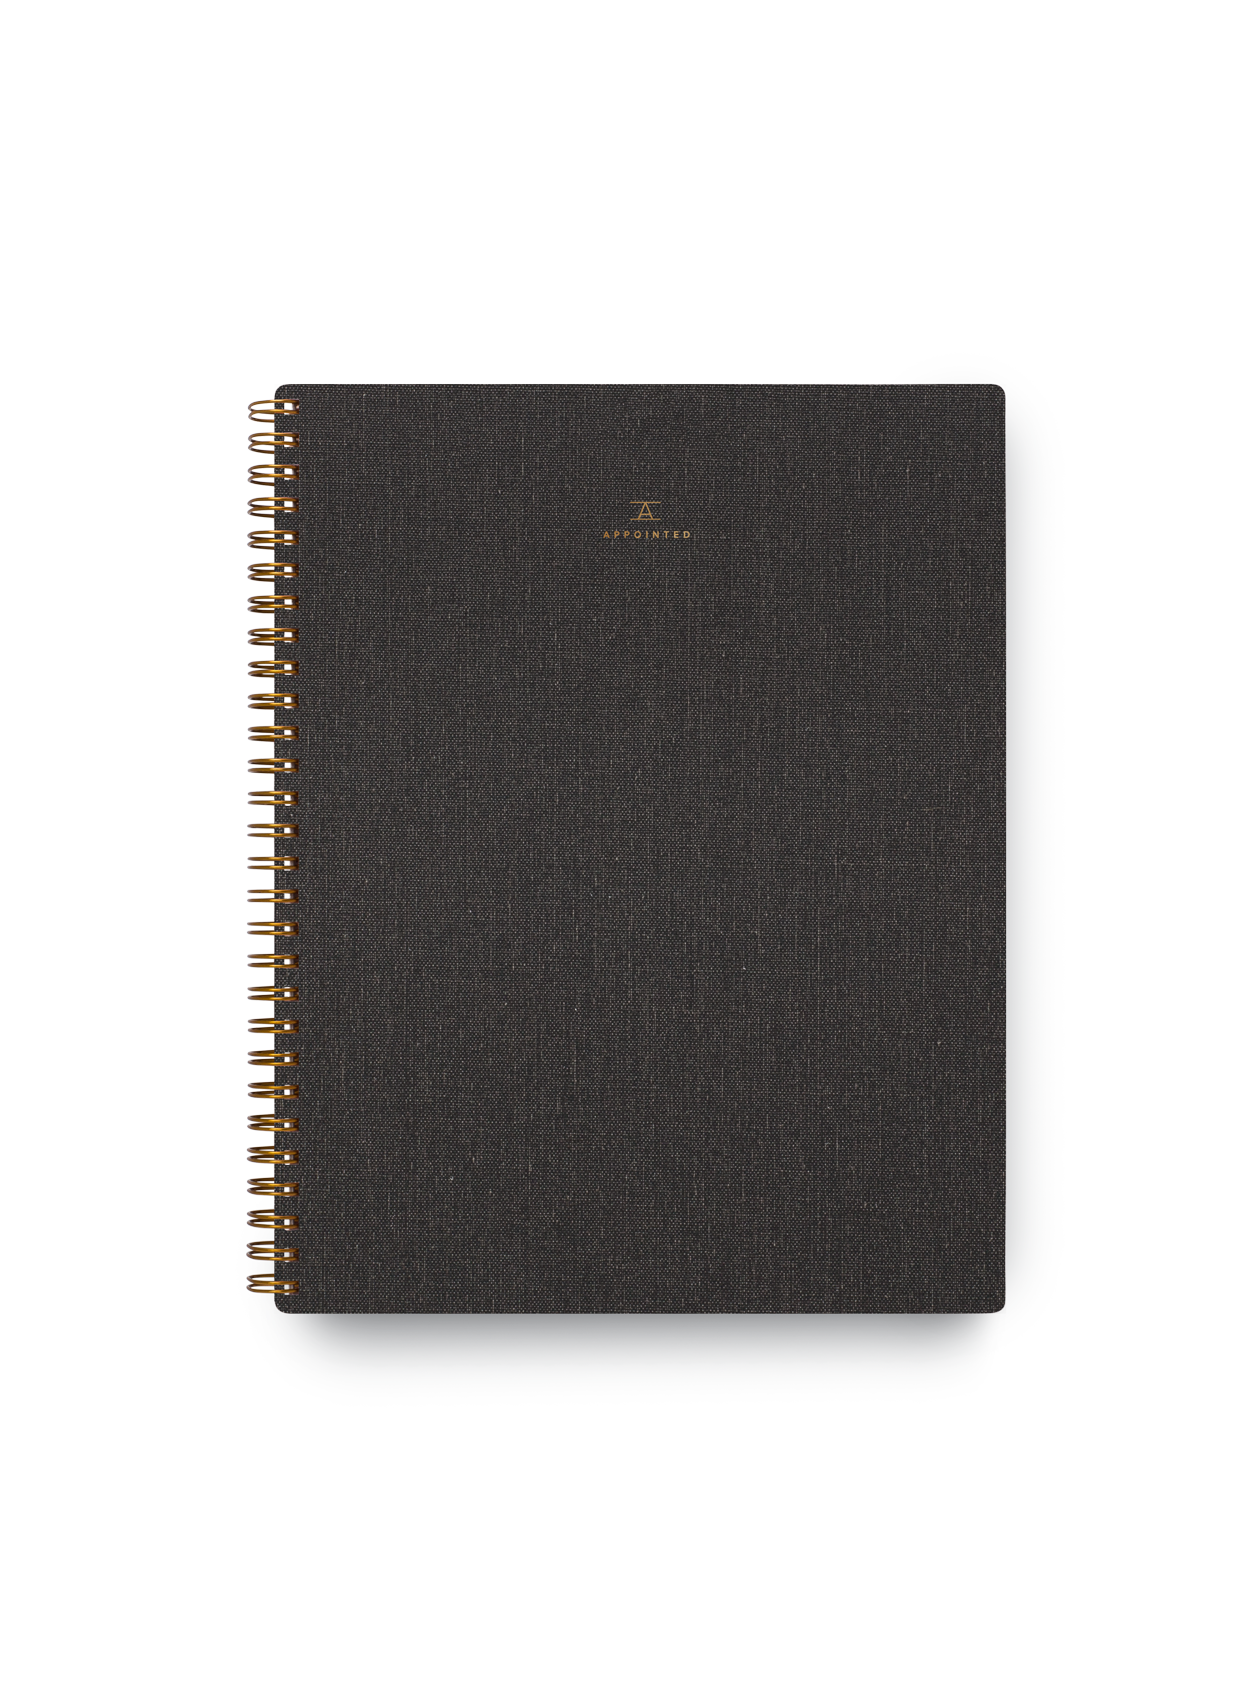 Appointed Notebook bookcloth with brass wire-o binding front view || Charcoal Gray